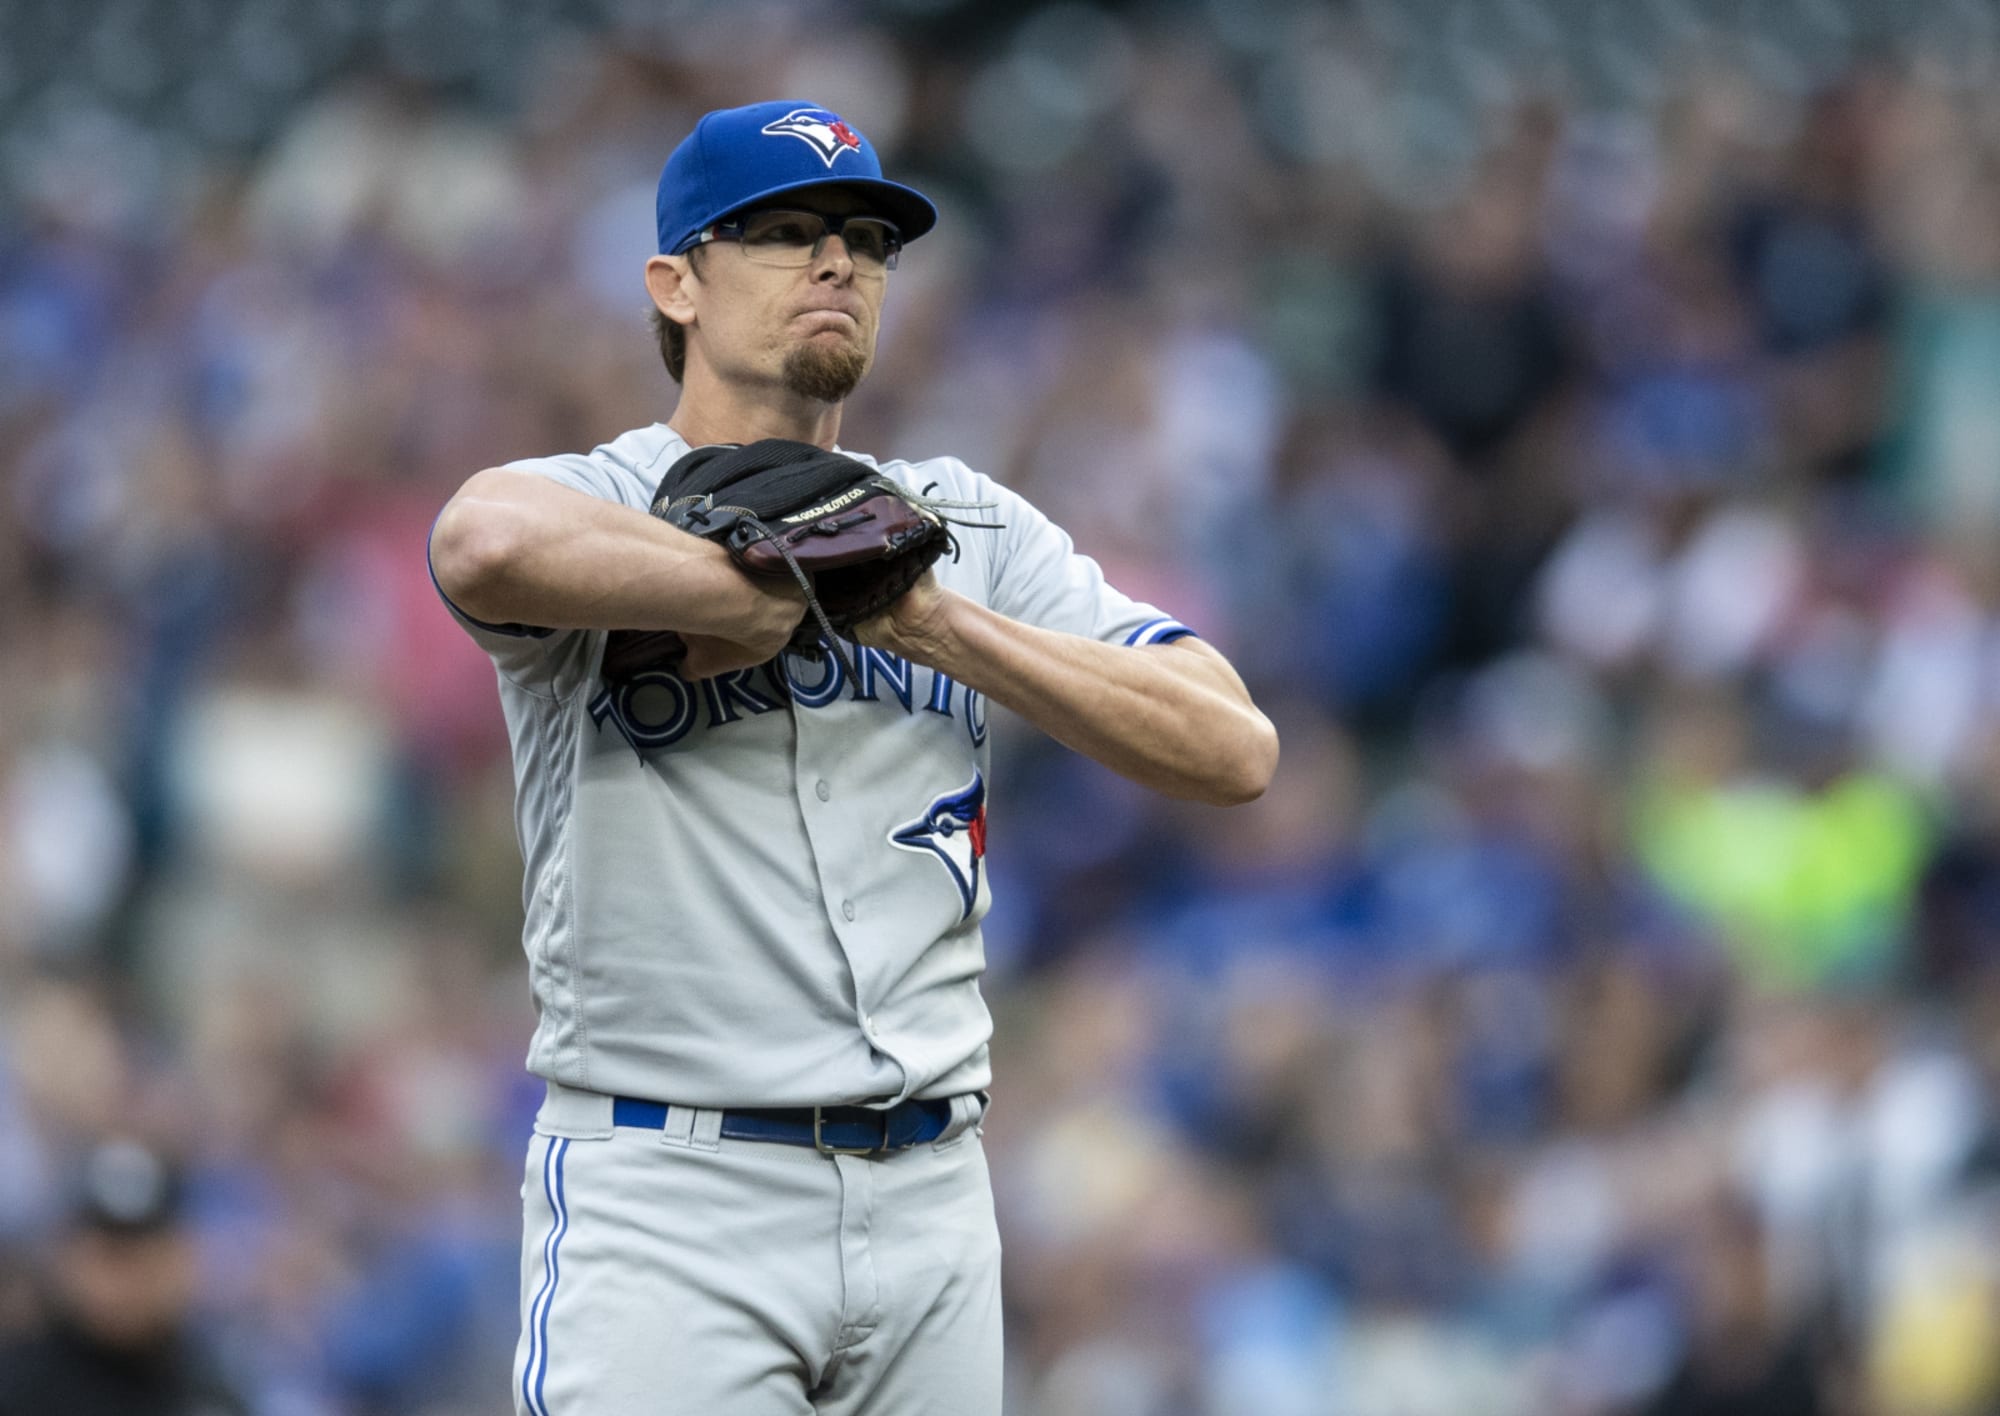 Blue Jays No more bullpen days, let's see some young starters